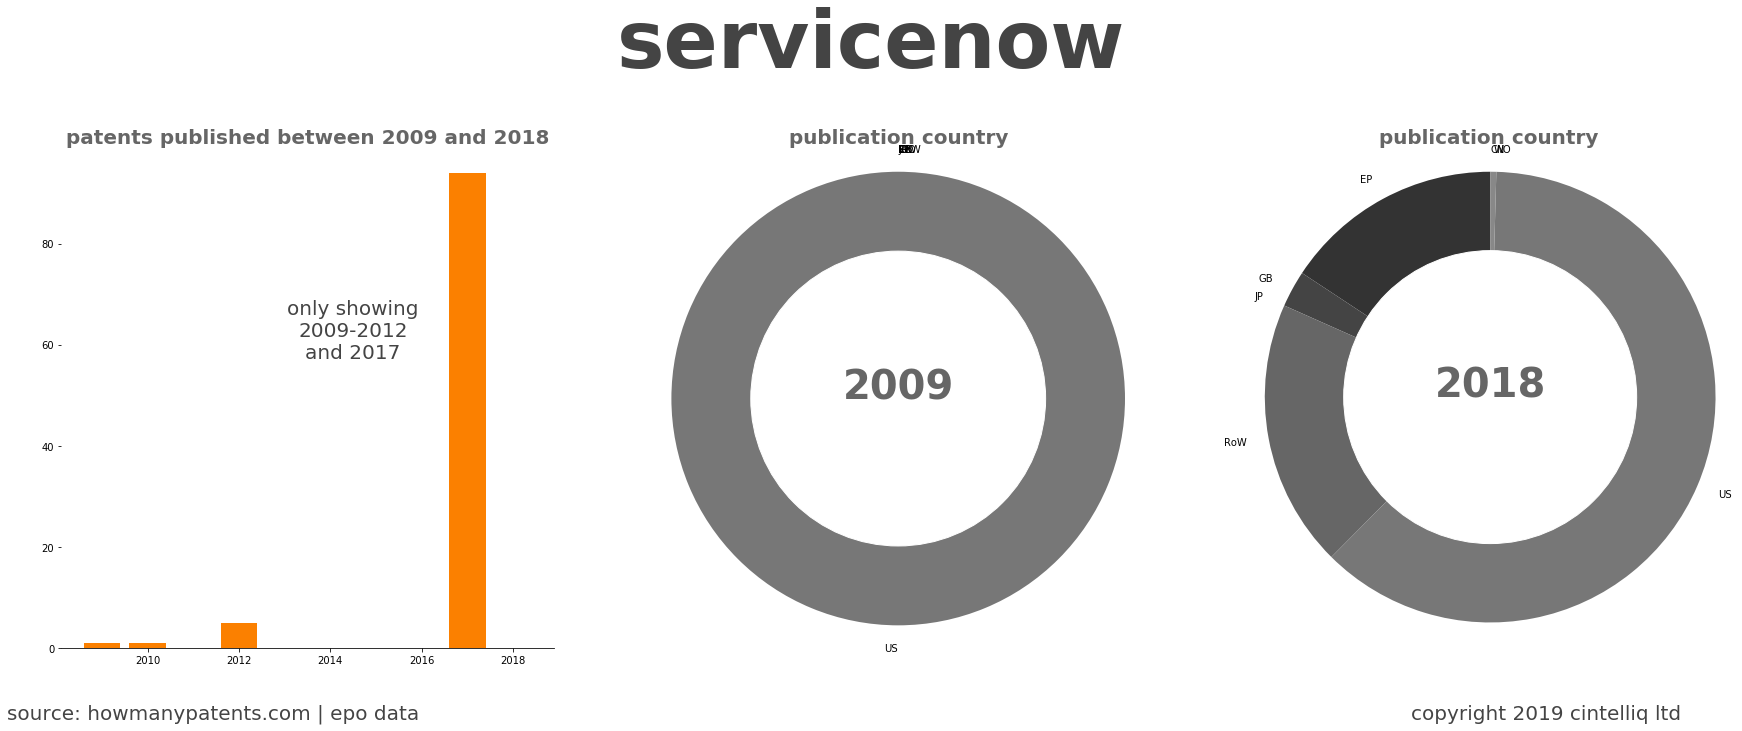 summary of patents for Servicenow